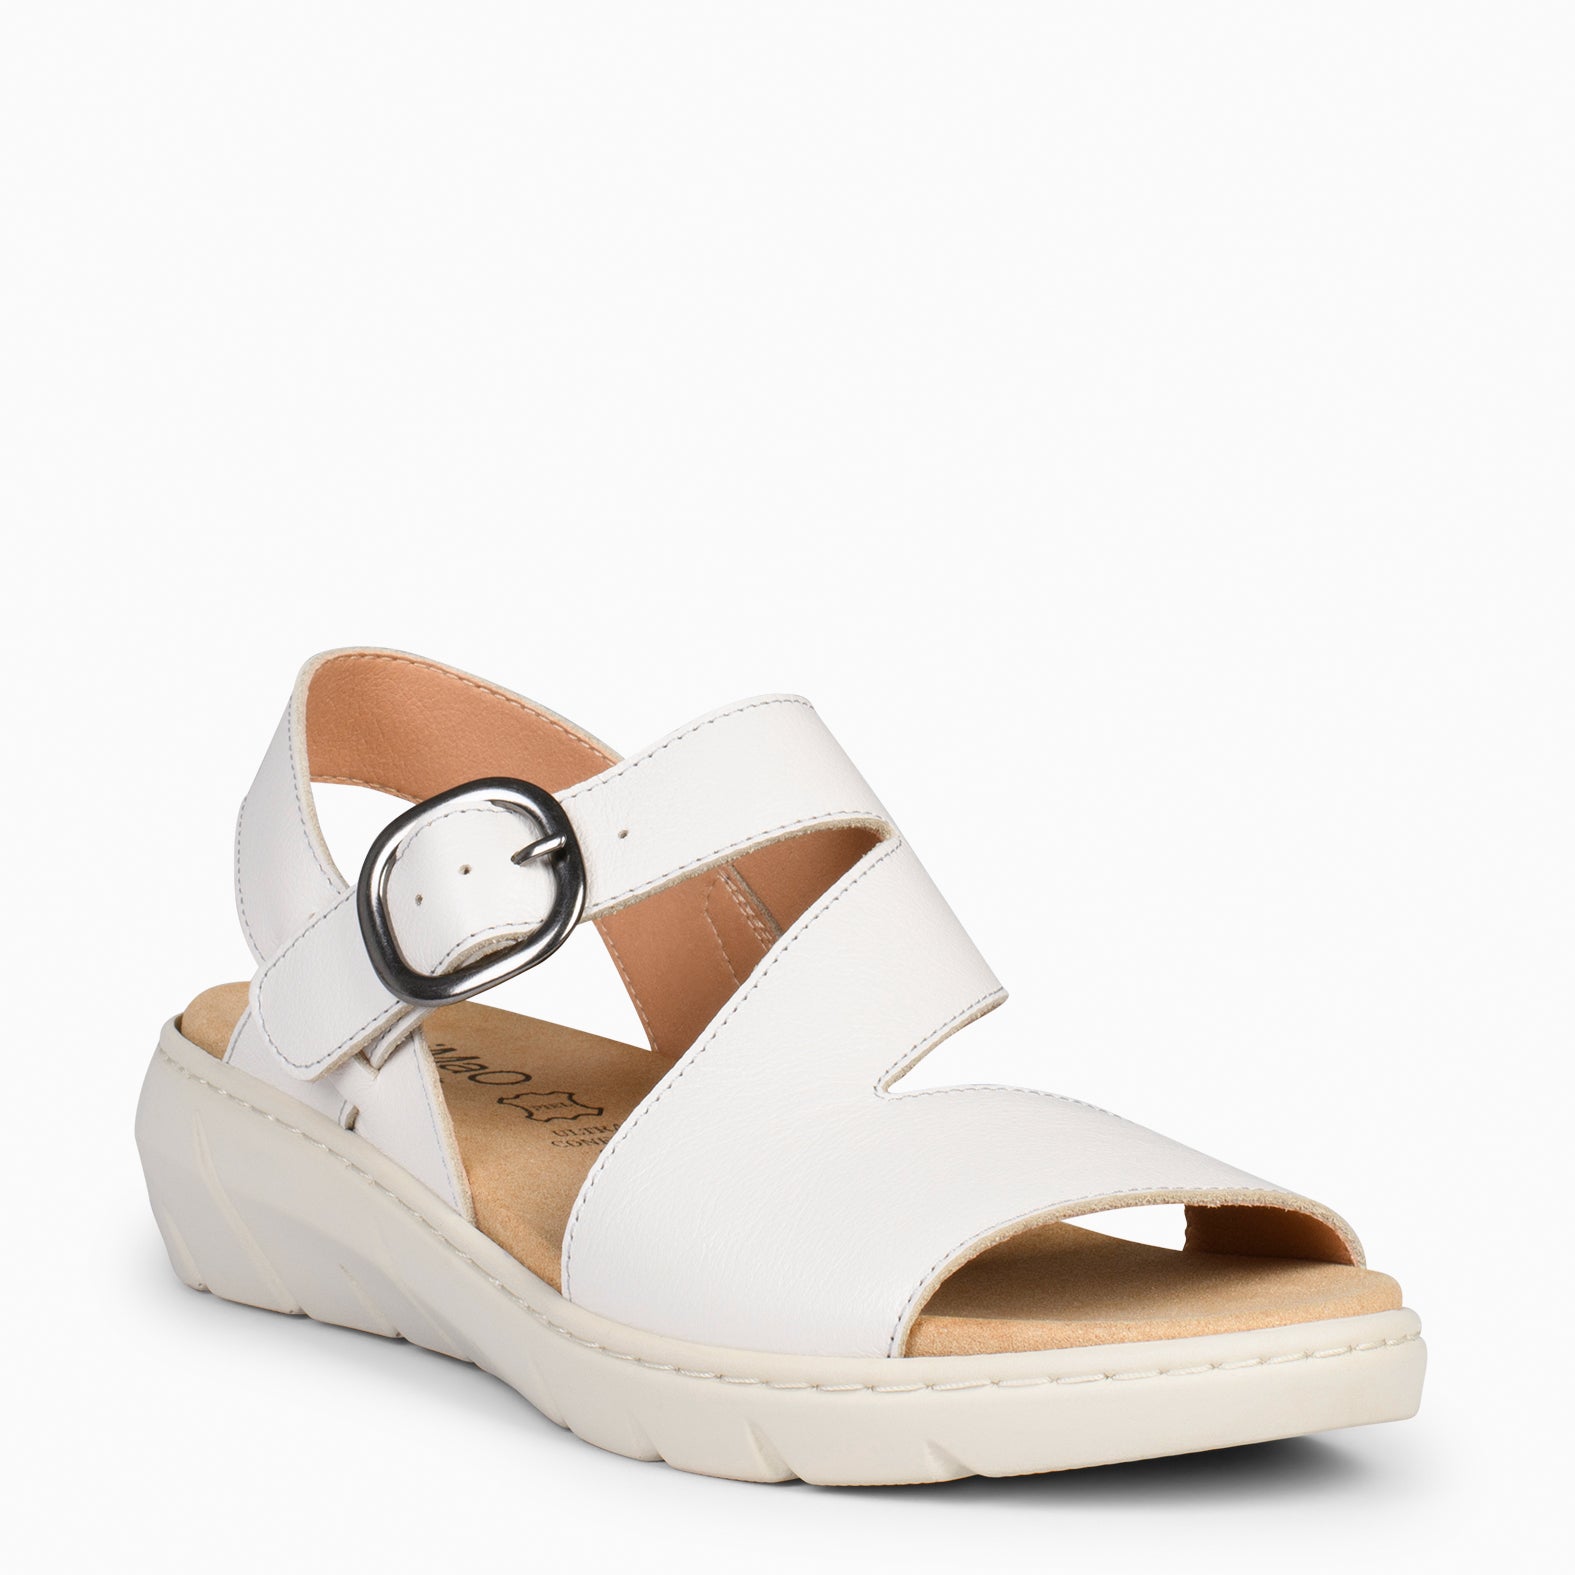 NATURA – WHITE sandals with removable insole